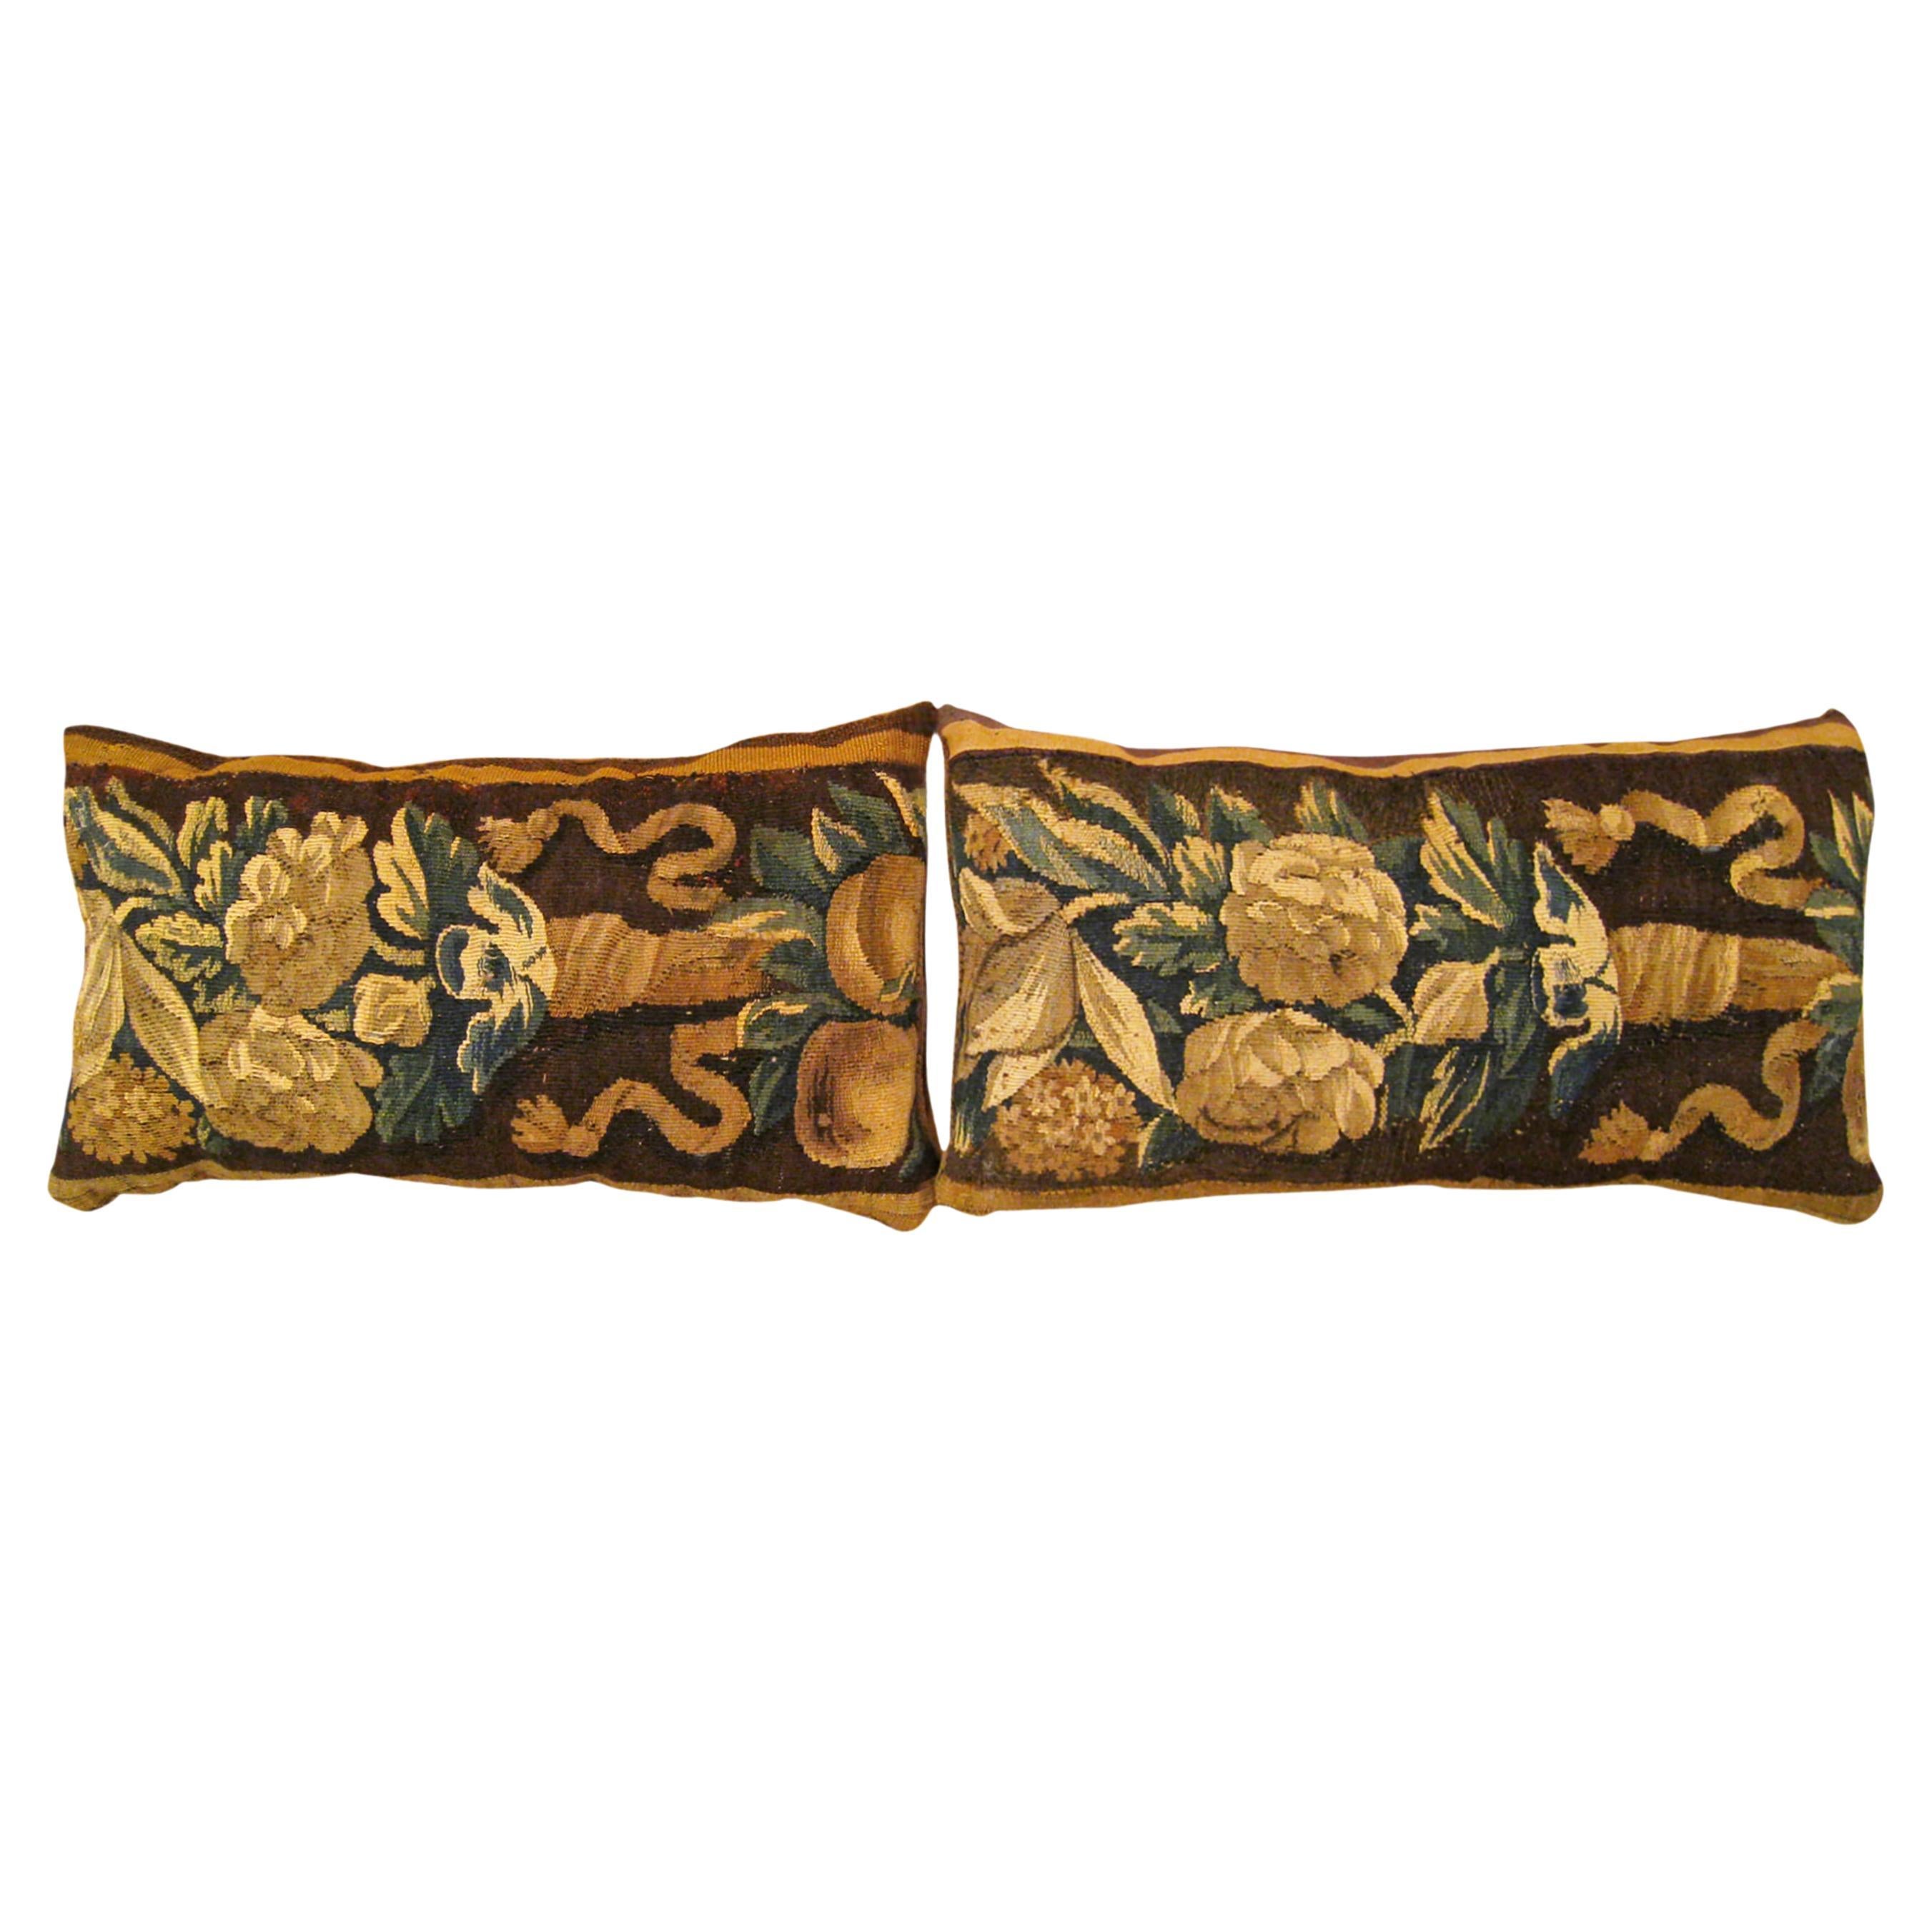 Pair of Decorative Antique 18th Century Tapestry Pillows with Floral Elements For Sale